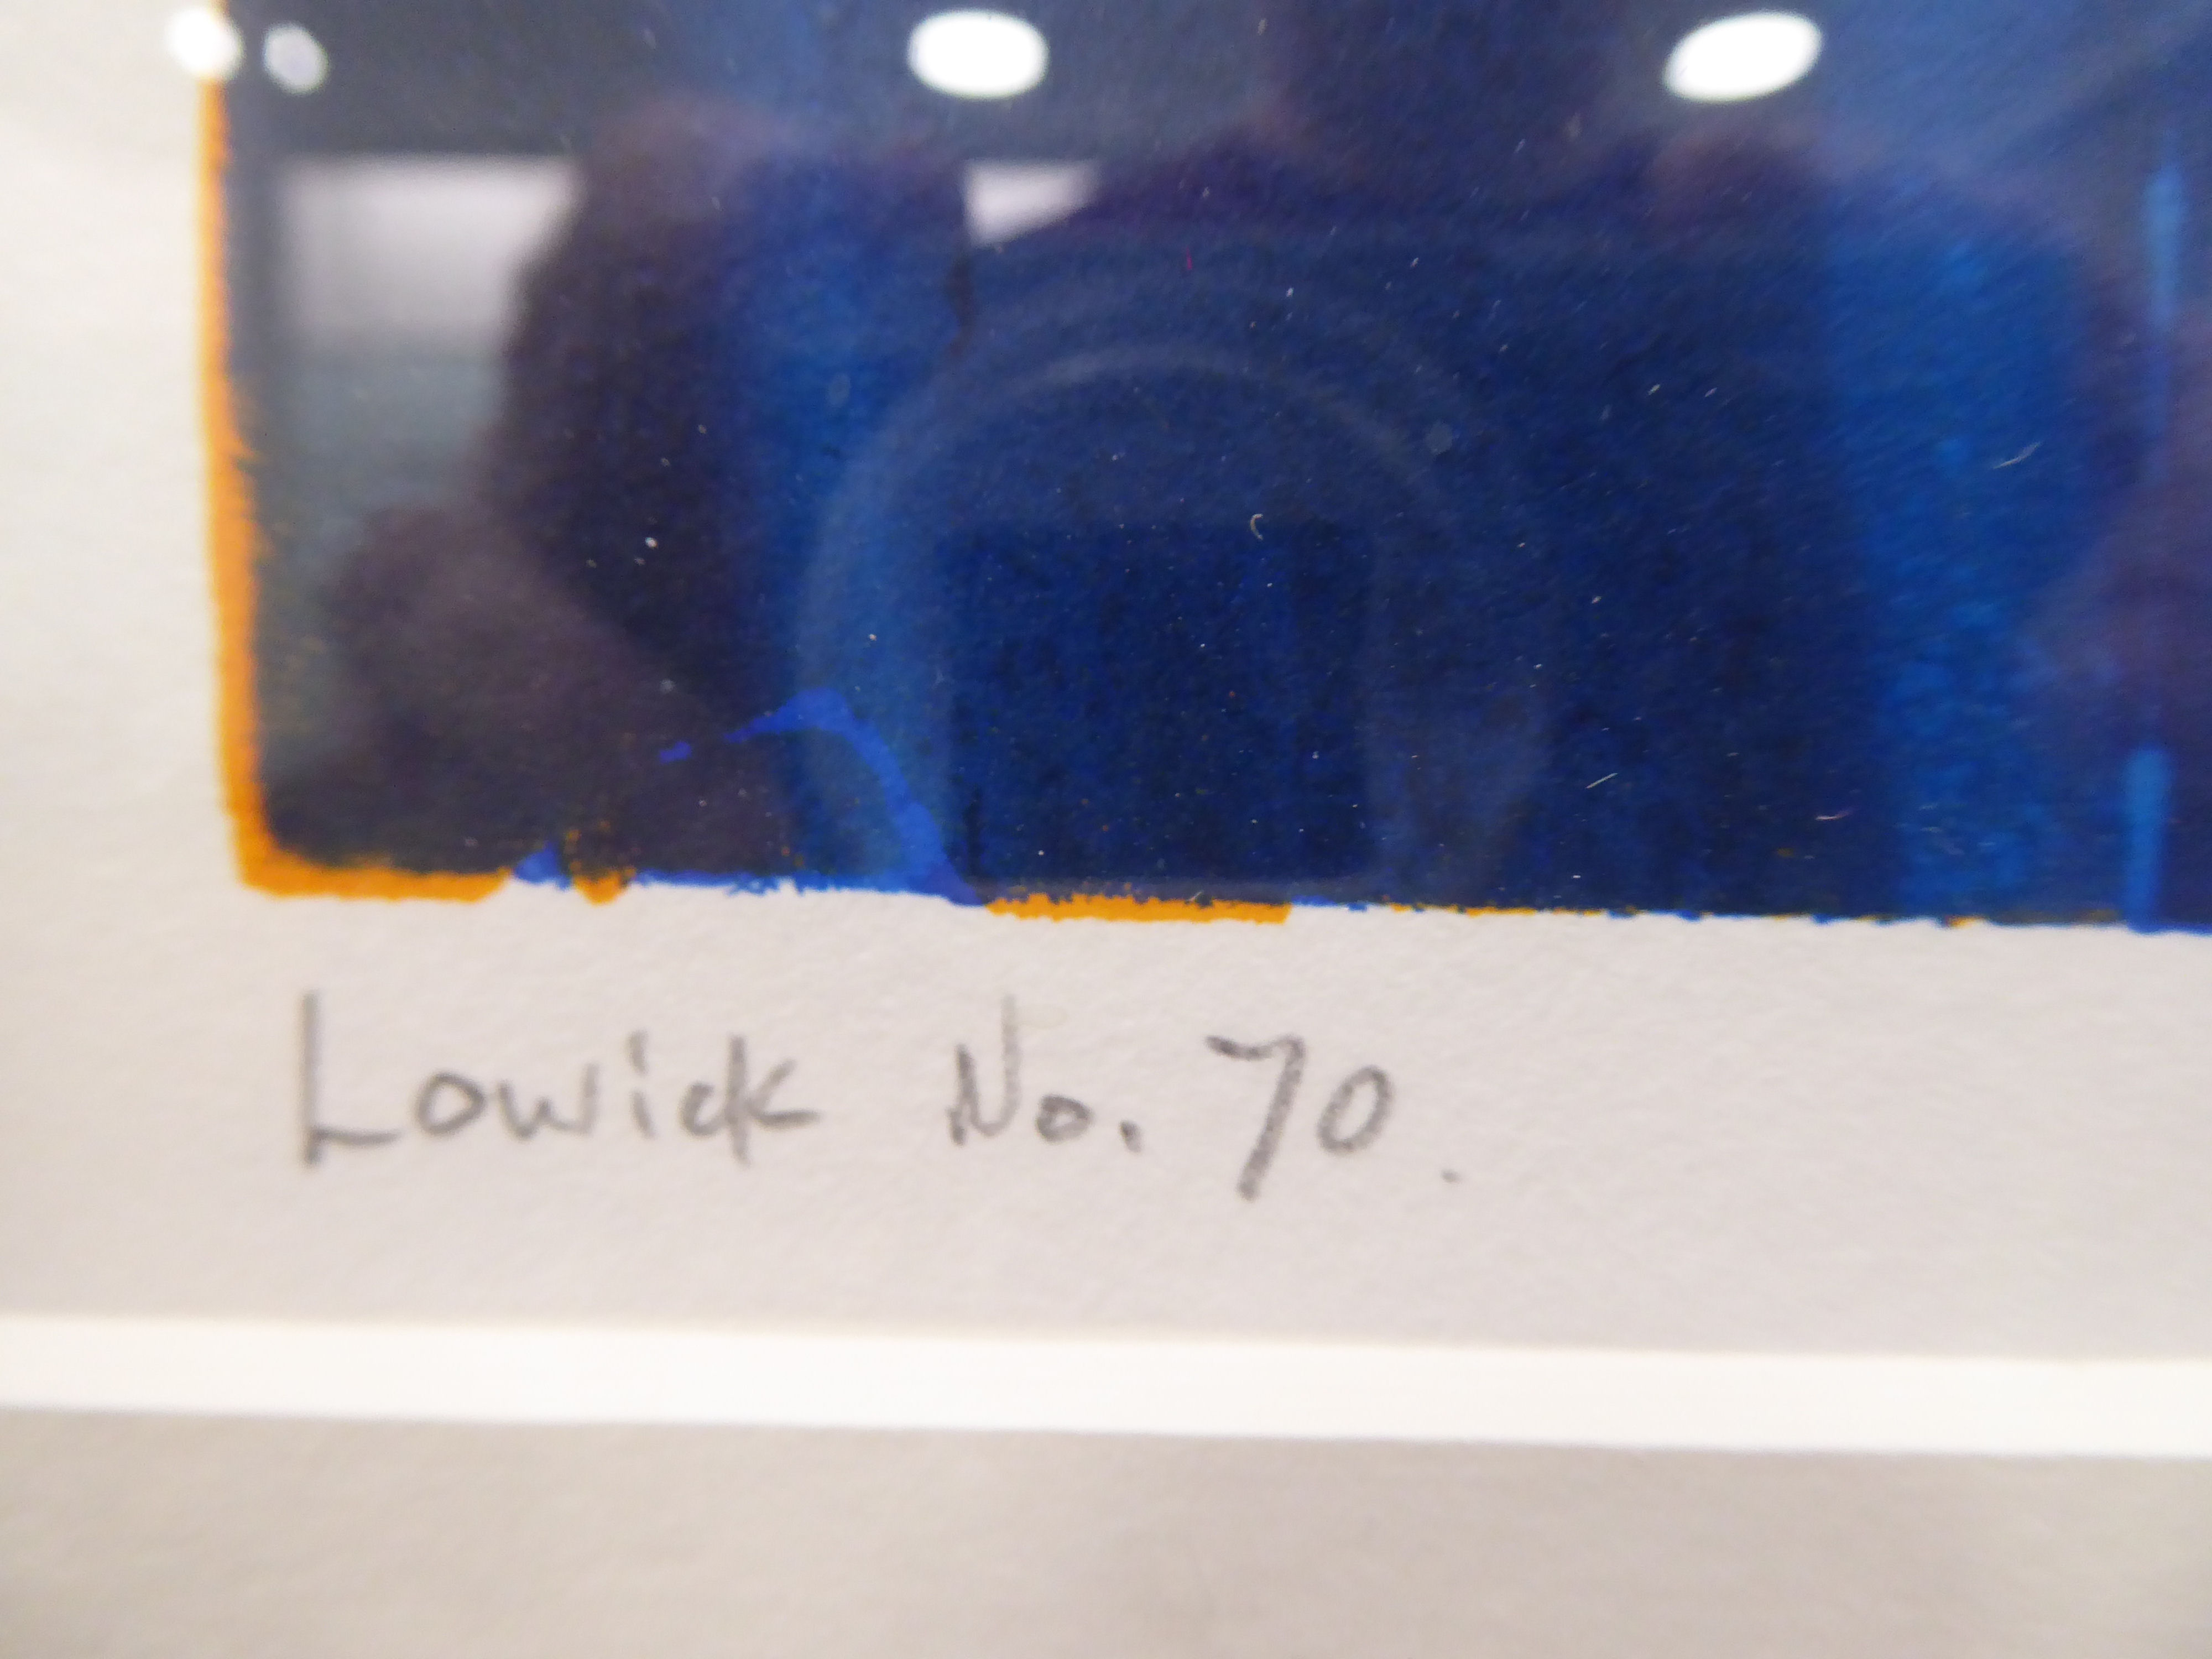 Martyn Brewster - 'Lowick 70'  monoprint  bears a pencil title & signature, dated '94 with gallery - Image 2 of 4